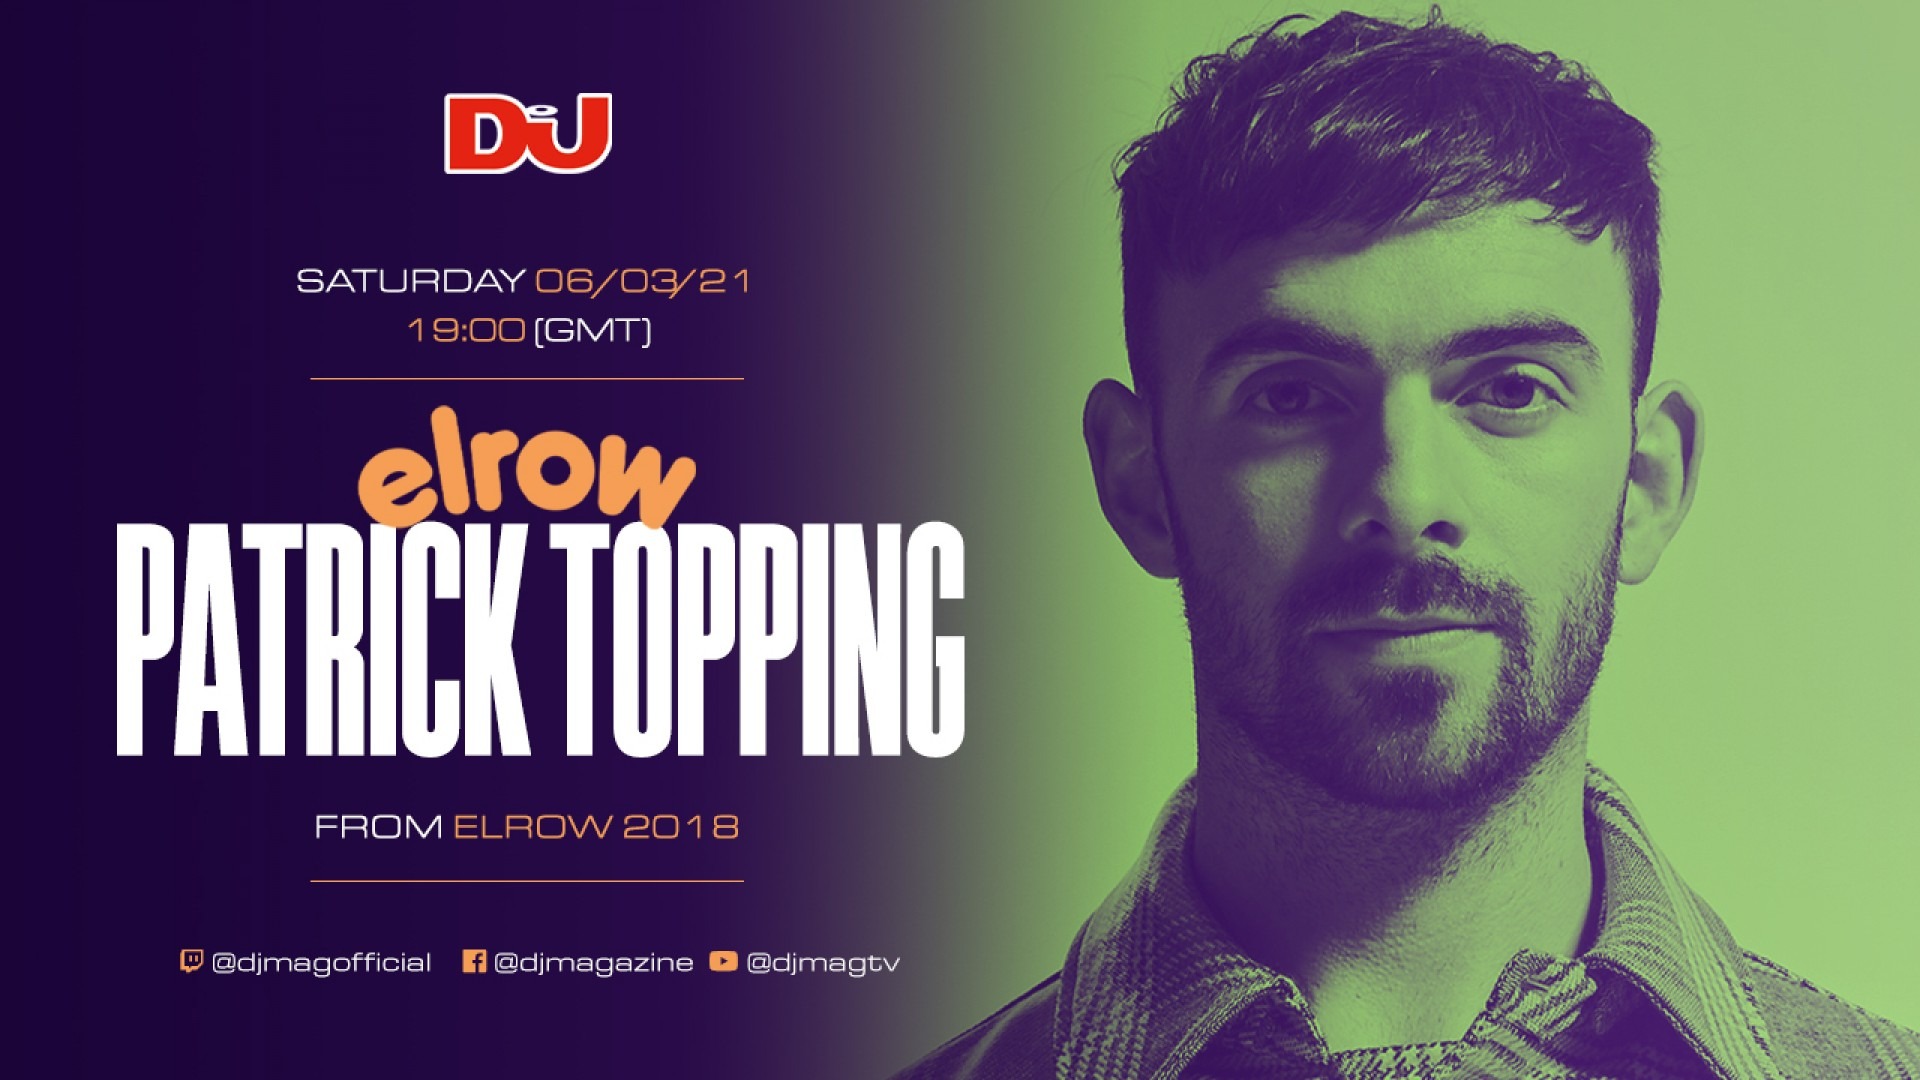 Watch Patrick Topping's set from Elrow 2018, This Saturday